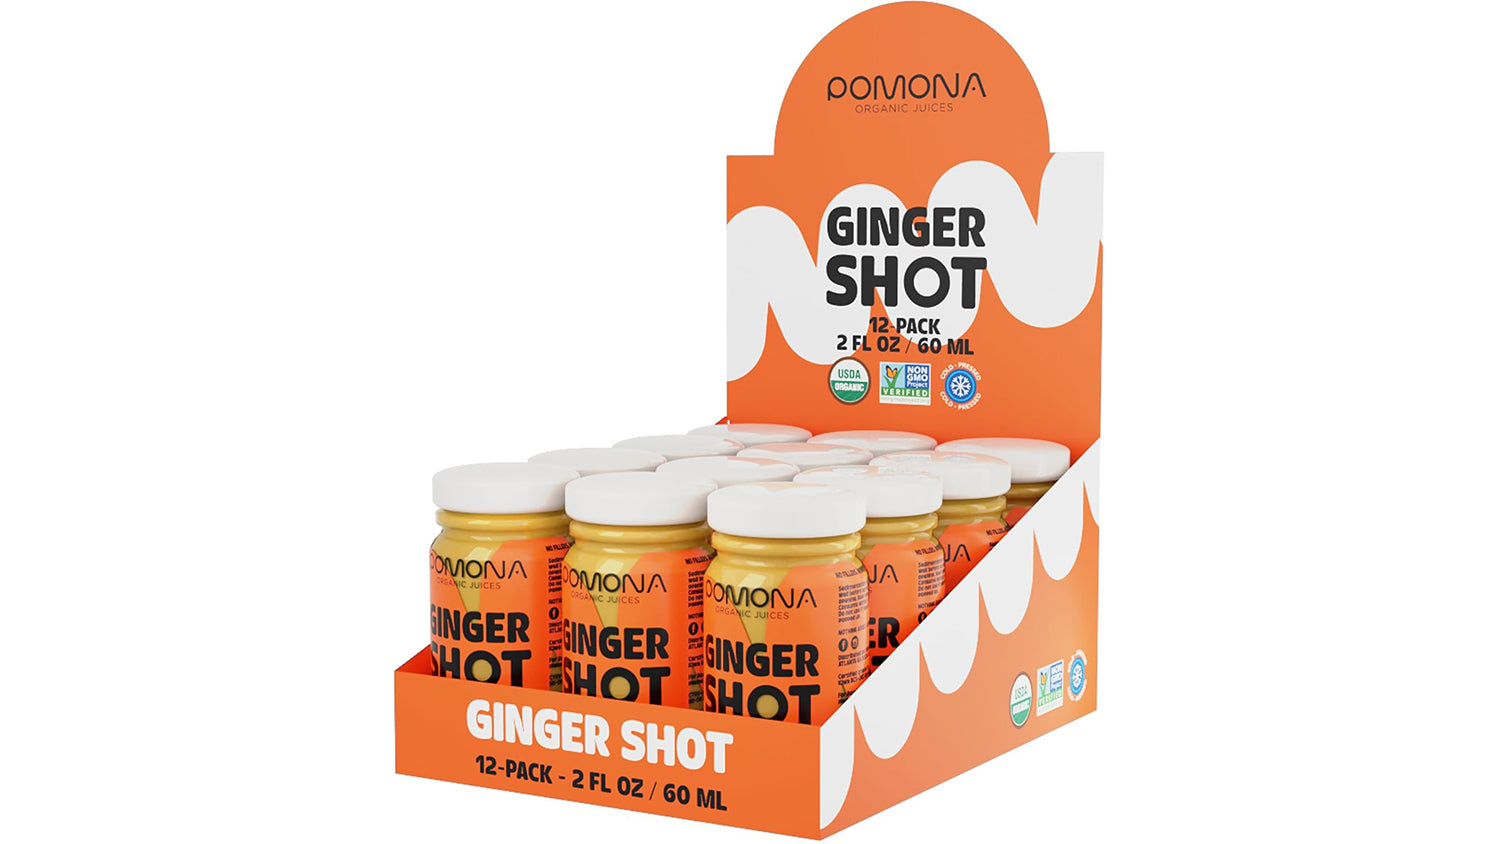 Ginger - 27g organic cold pressed ginger in every bottle, 6 or 12 x 60 –  fightershots